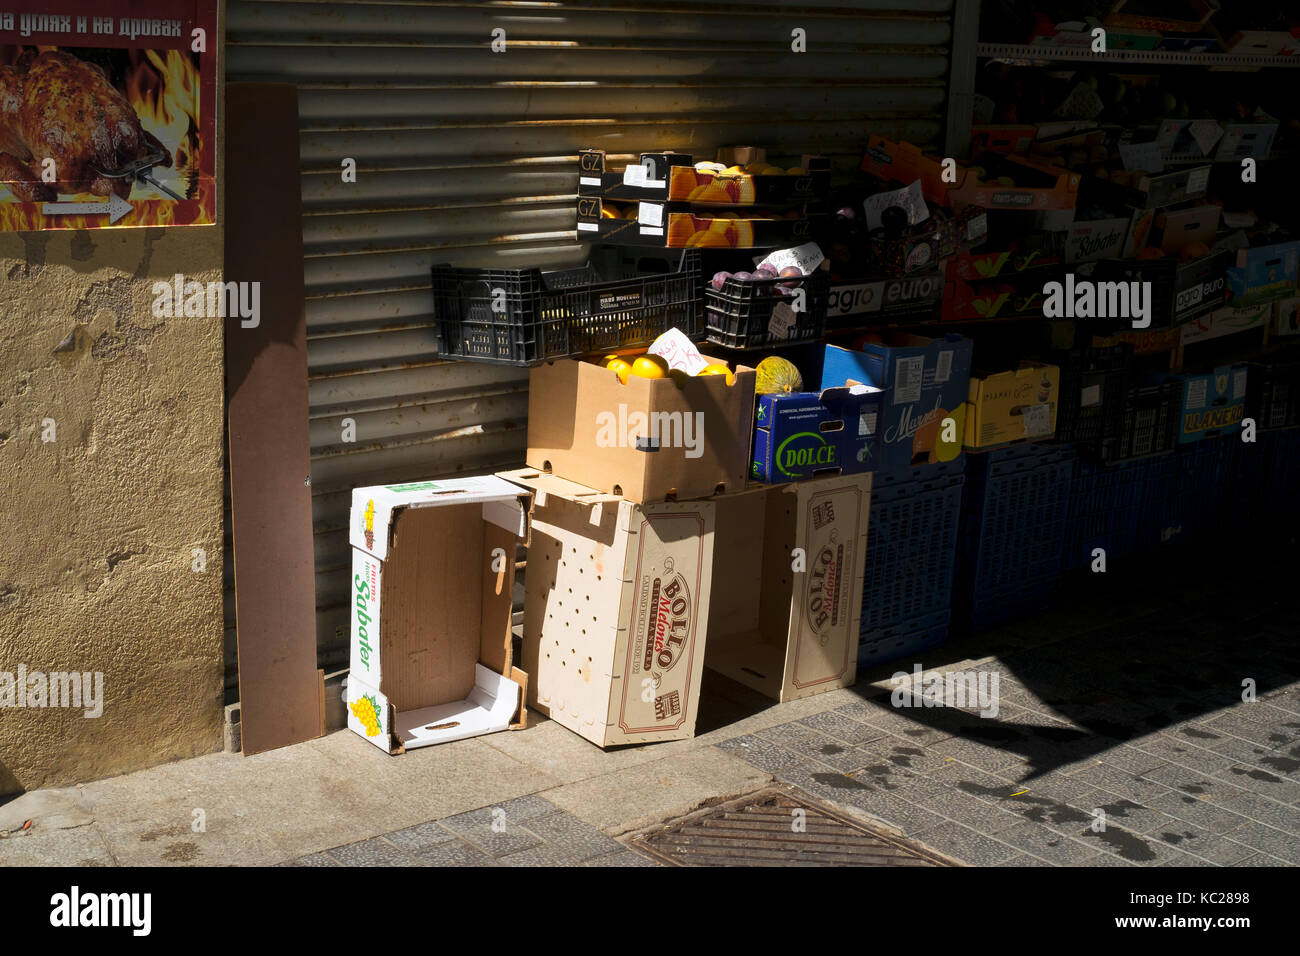 Fruit and vegetables stacked up in boxes and pallets in a side street of Lloret de Mar, Spain Stock Photo